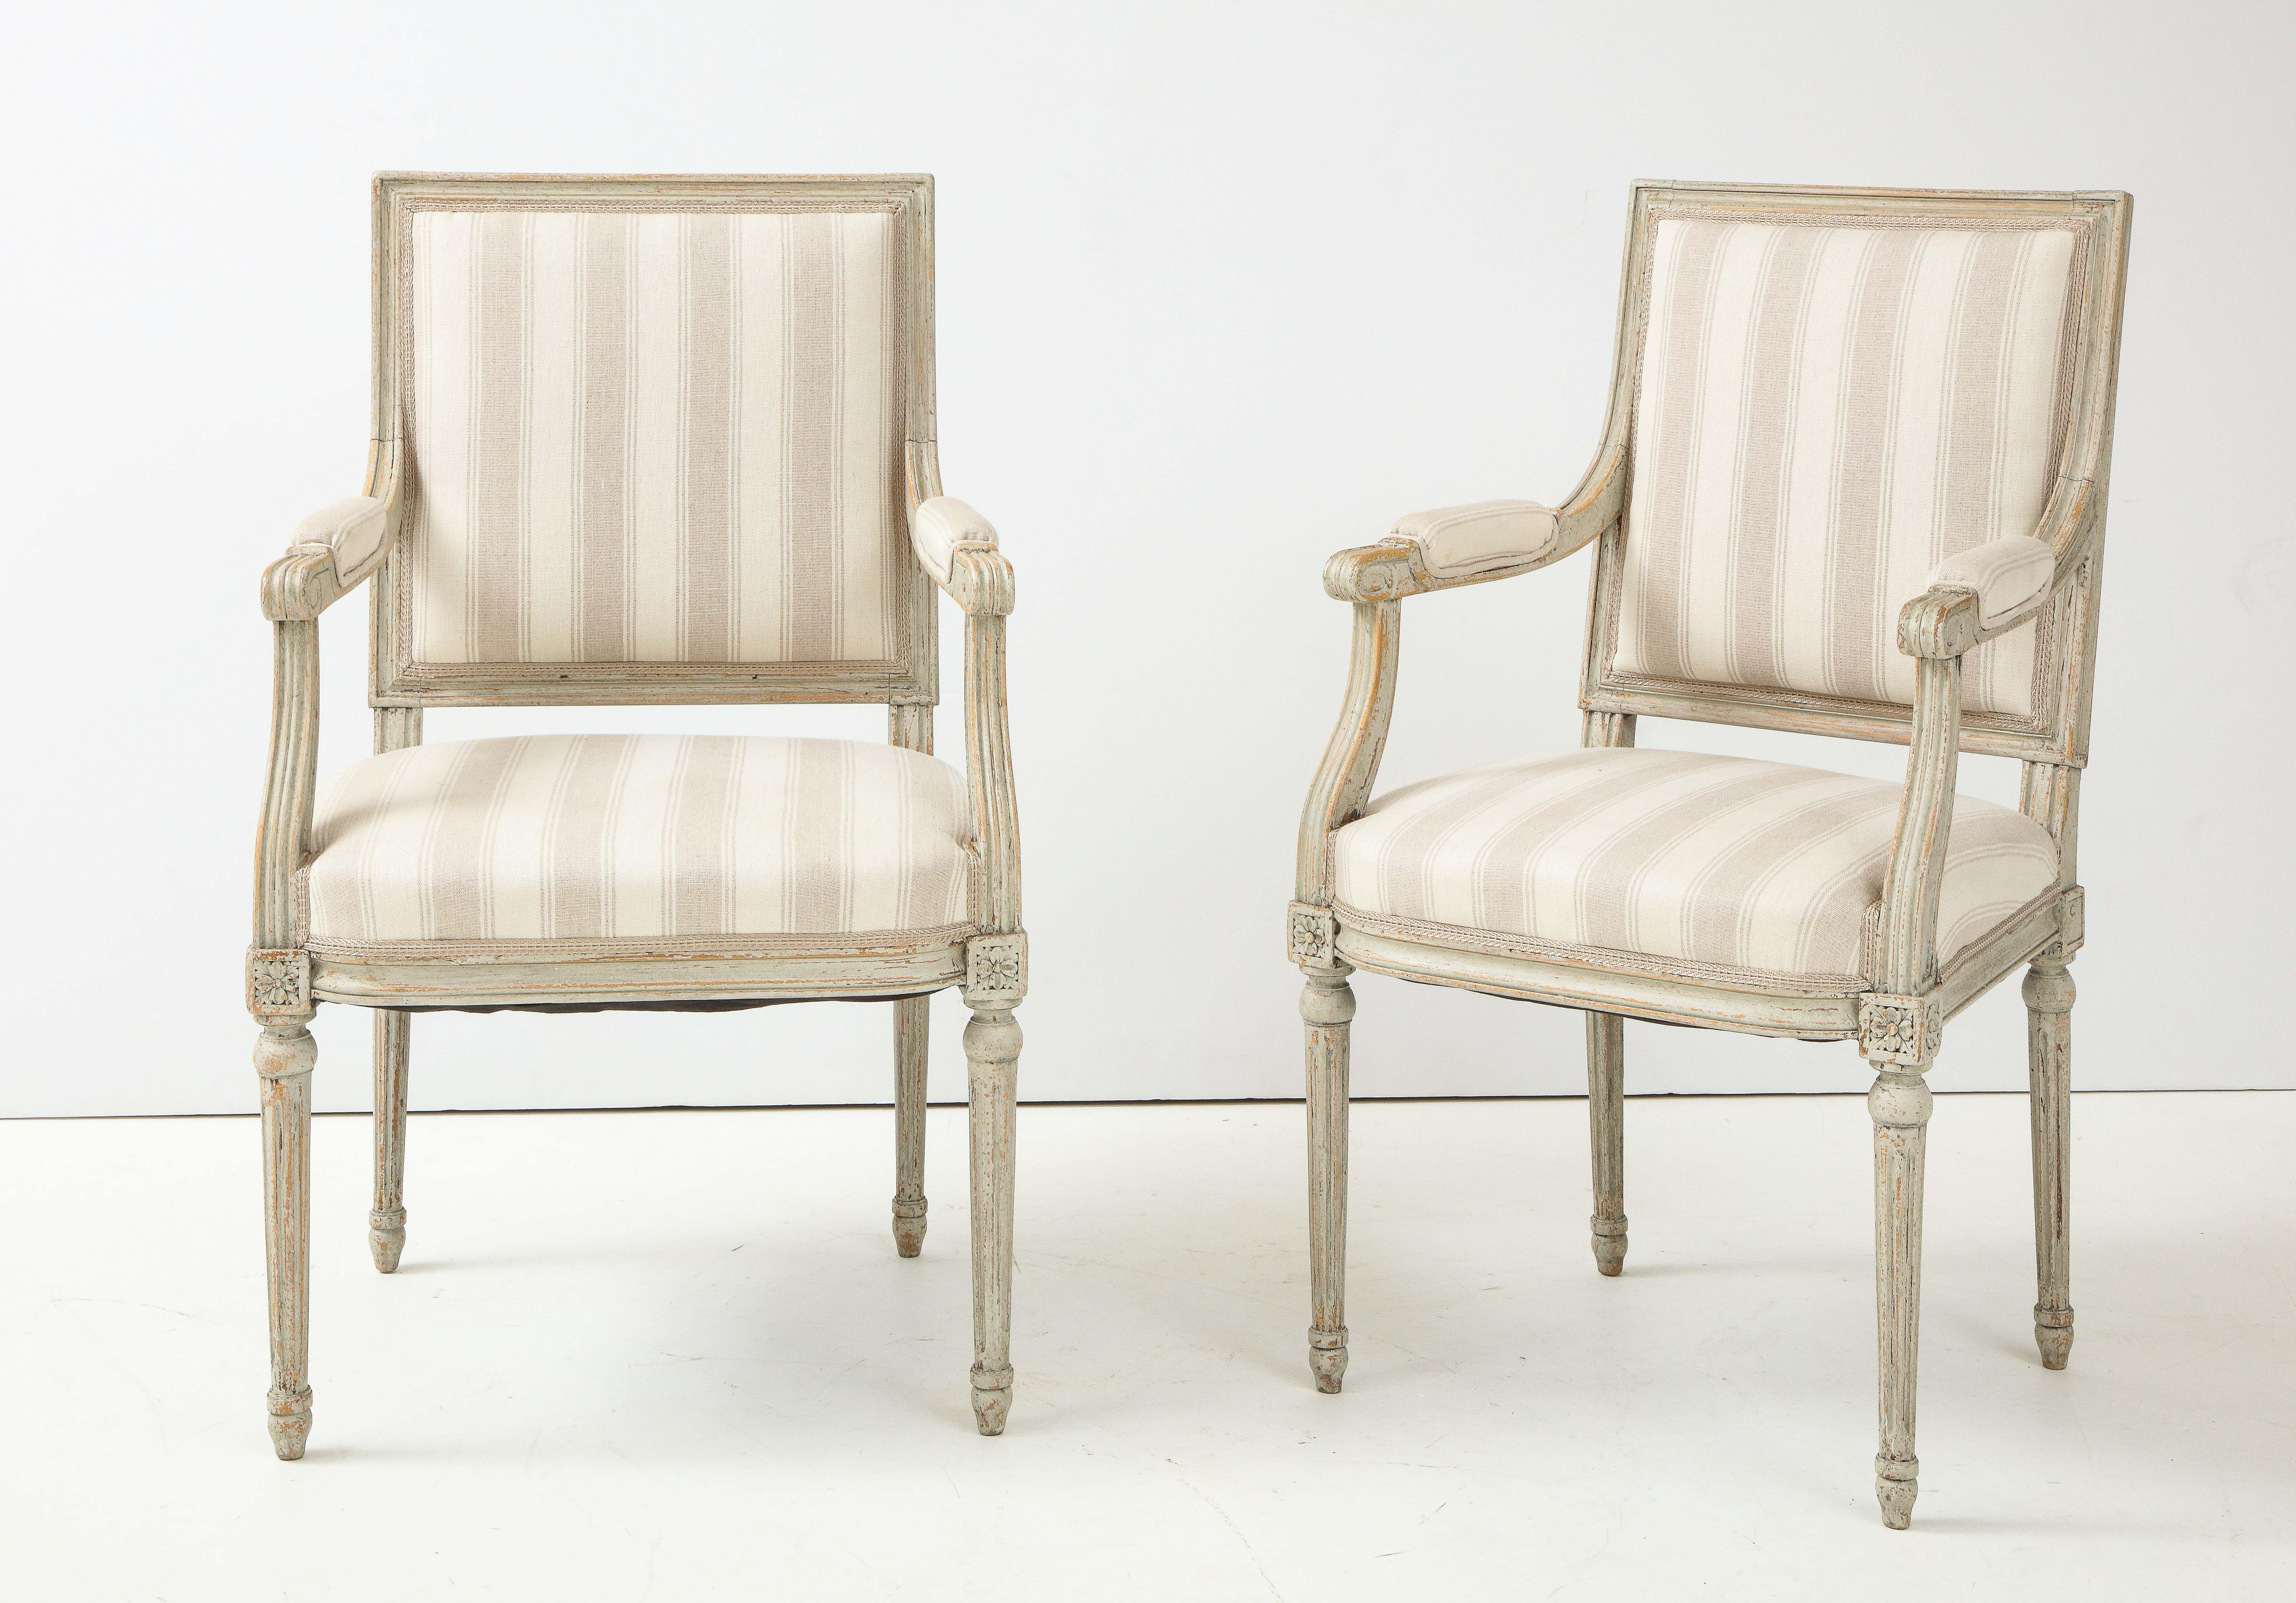 19th Century Near Pair of Swedish Late Gustavian Style Painted Open Armchairs, Circa 1870s